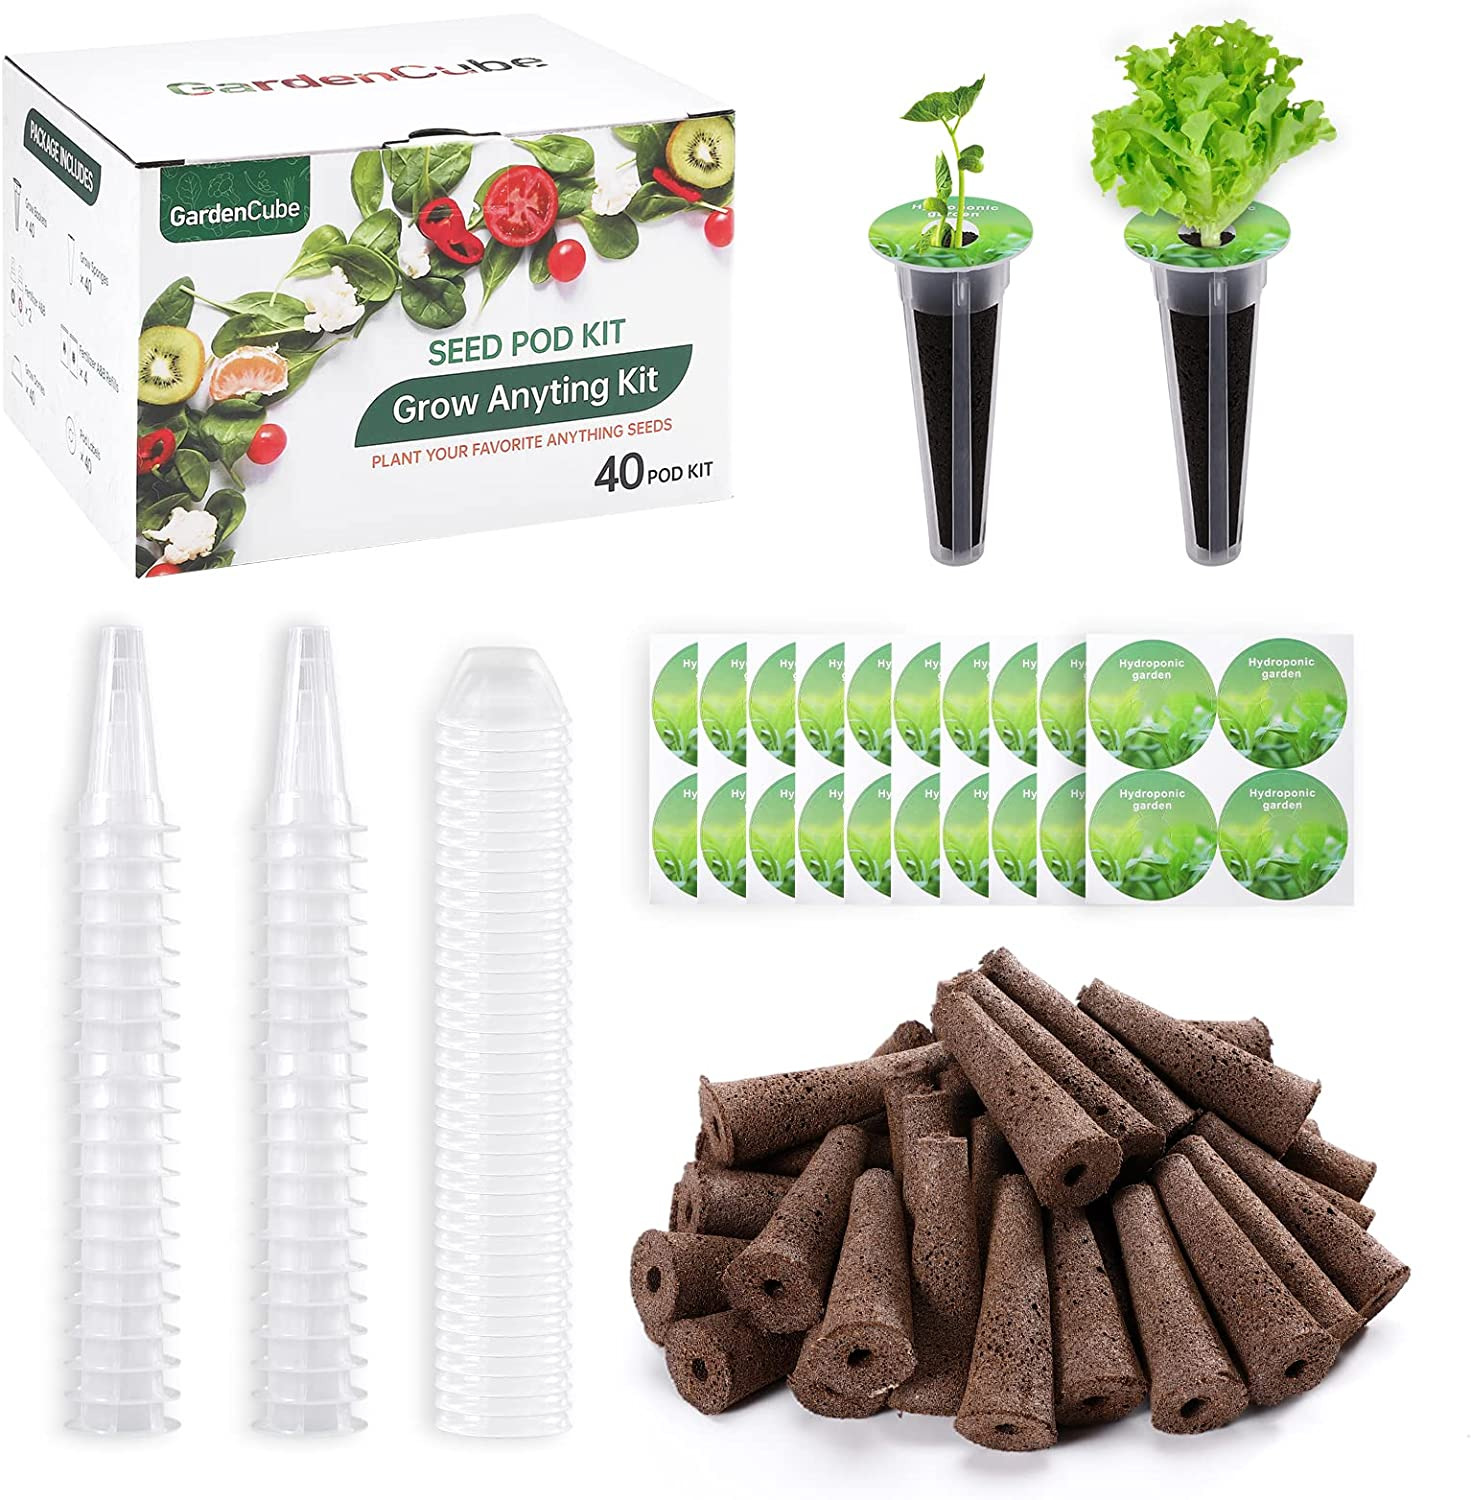 160Pcs Hydroponic Pods Kit: Grow Anything Kit with 40 Grow Sponges, 40 Grow Bask